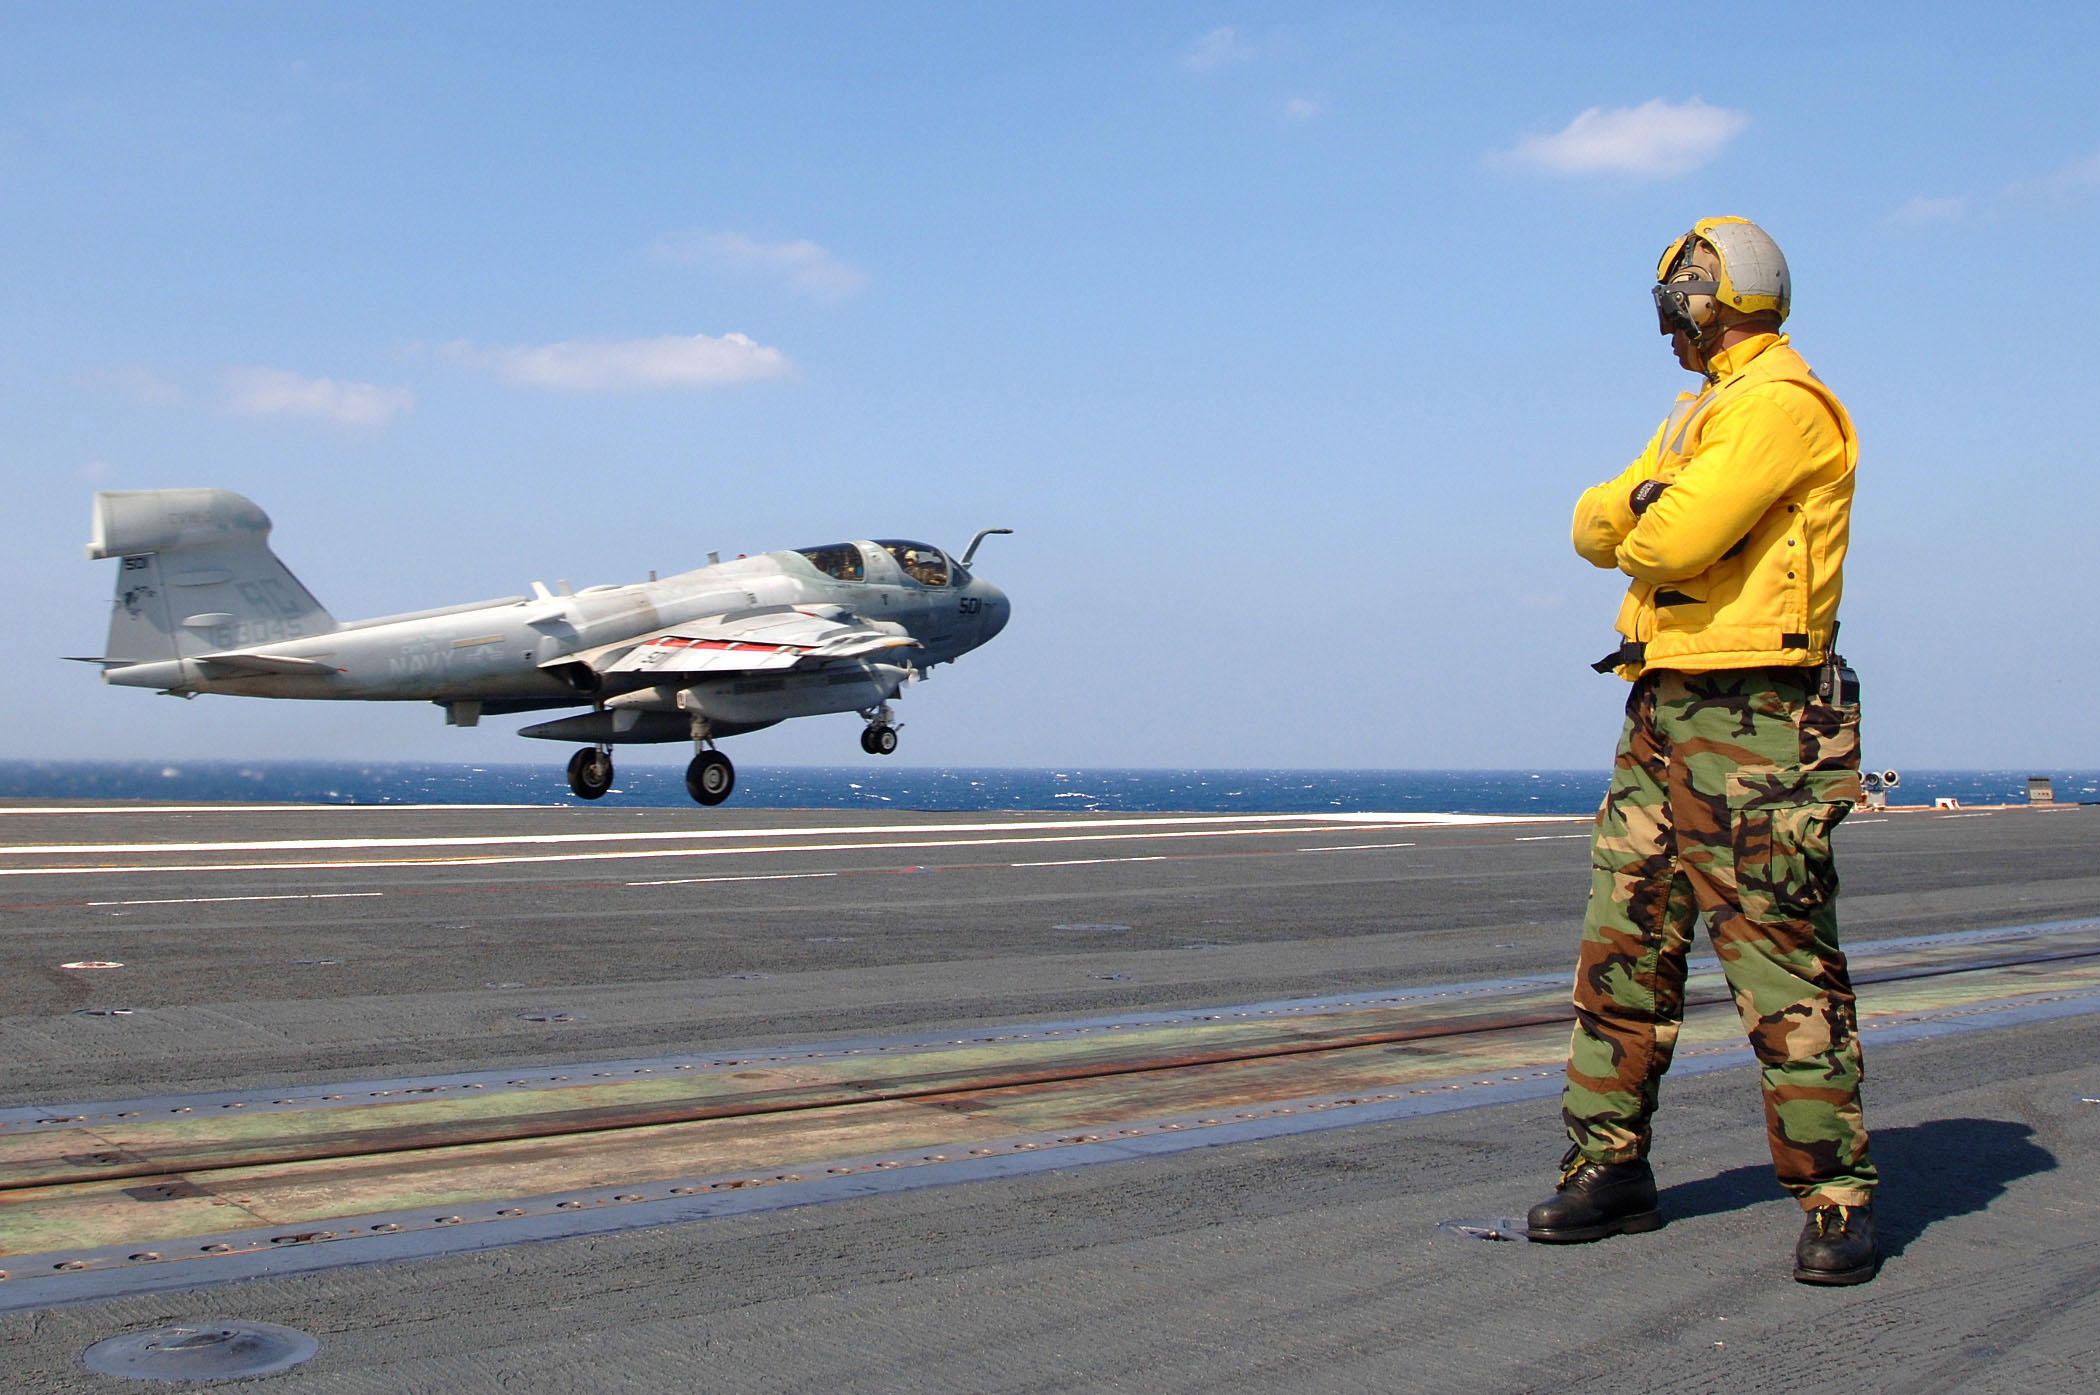 US Navy 051015-N-5345W-024 An Aviation Boatswain's Mate watches as an EA-6B Prowler, assigned to the Zappers of Electronic Warfare Squadron One Three Zero (VAQ-130), launches during flight operations